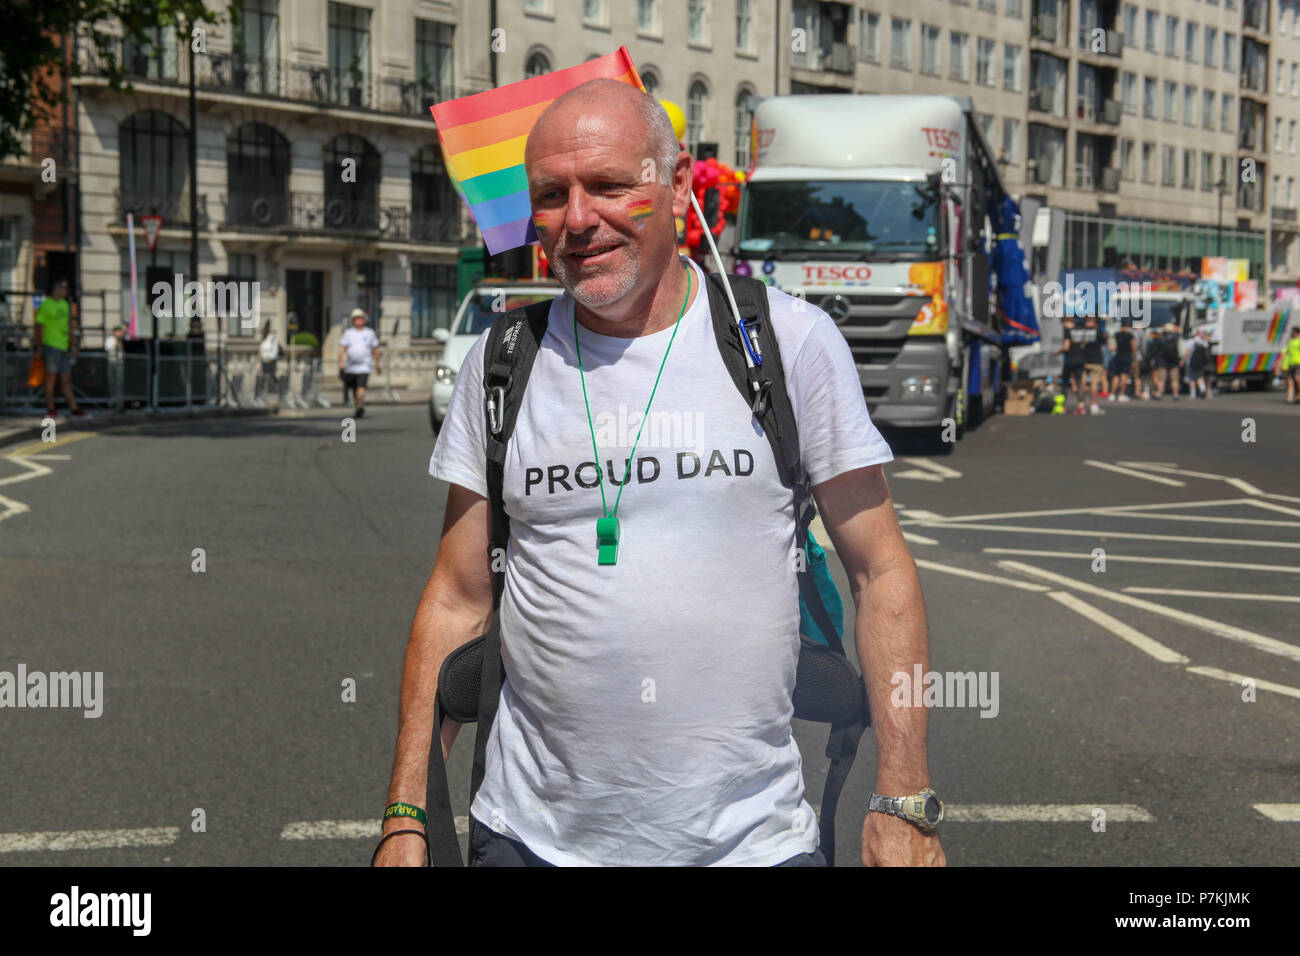 London, UK. 7th July 2018. Proud Dad supporter at Pride in London Credit: Alex Cavendish/Alamy Live News Stock Photo